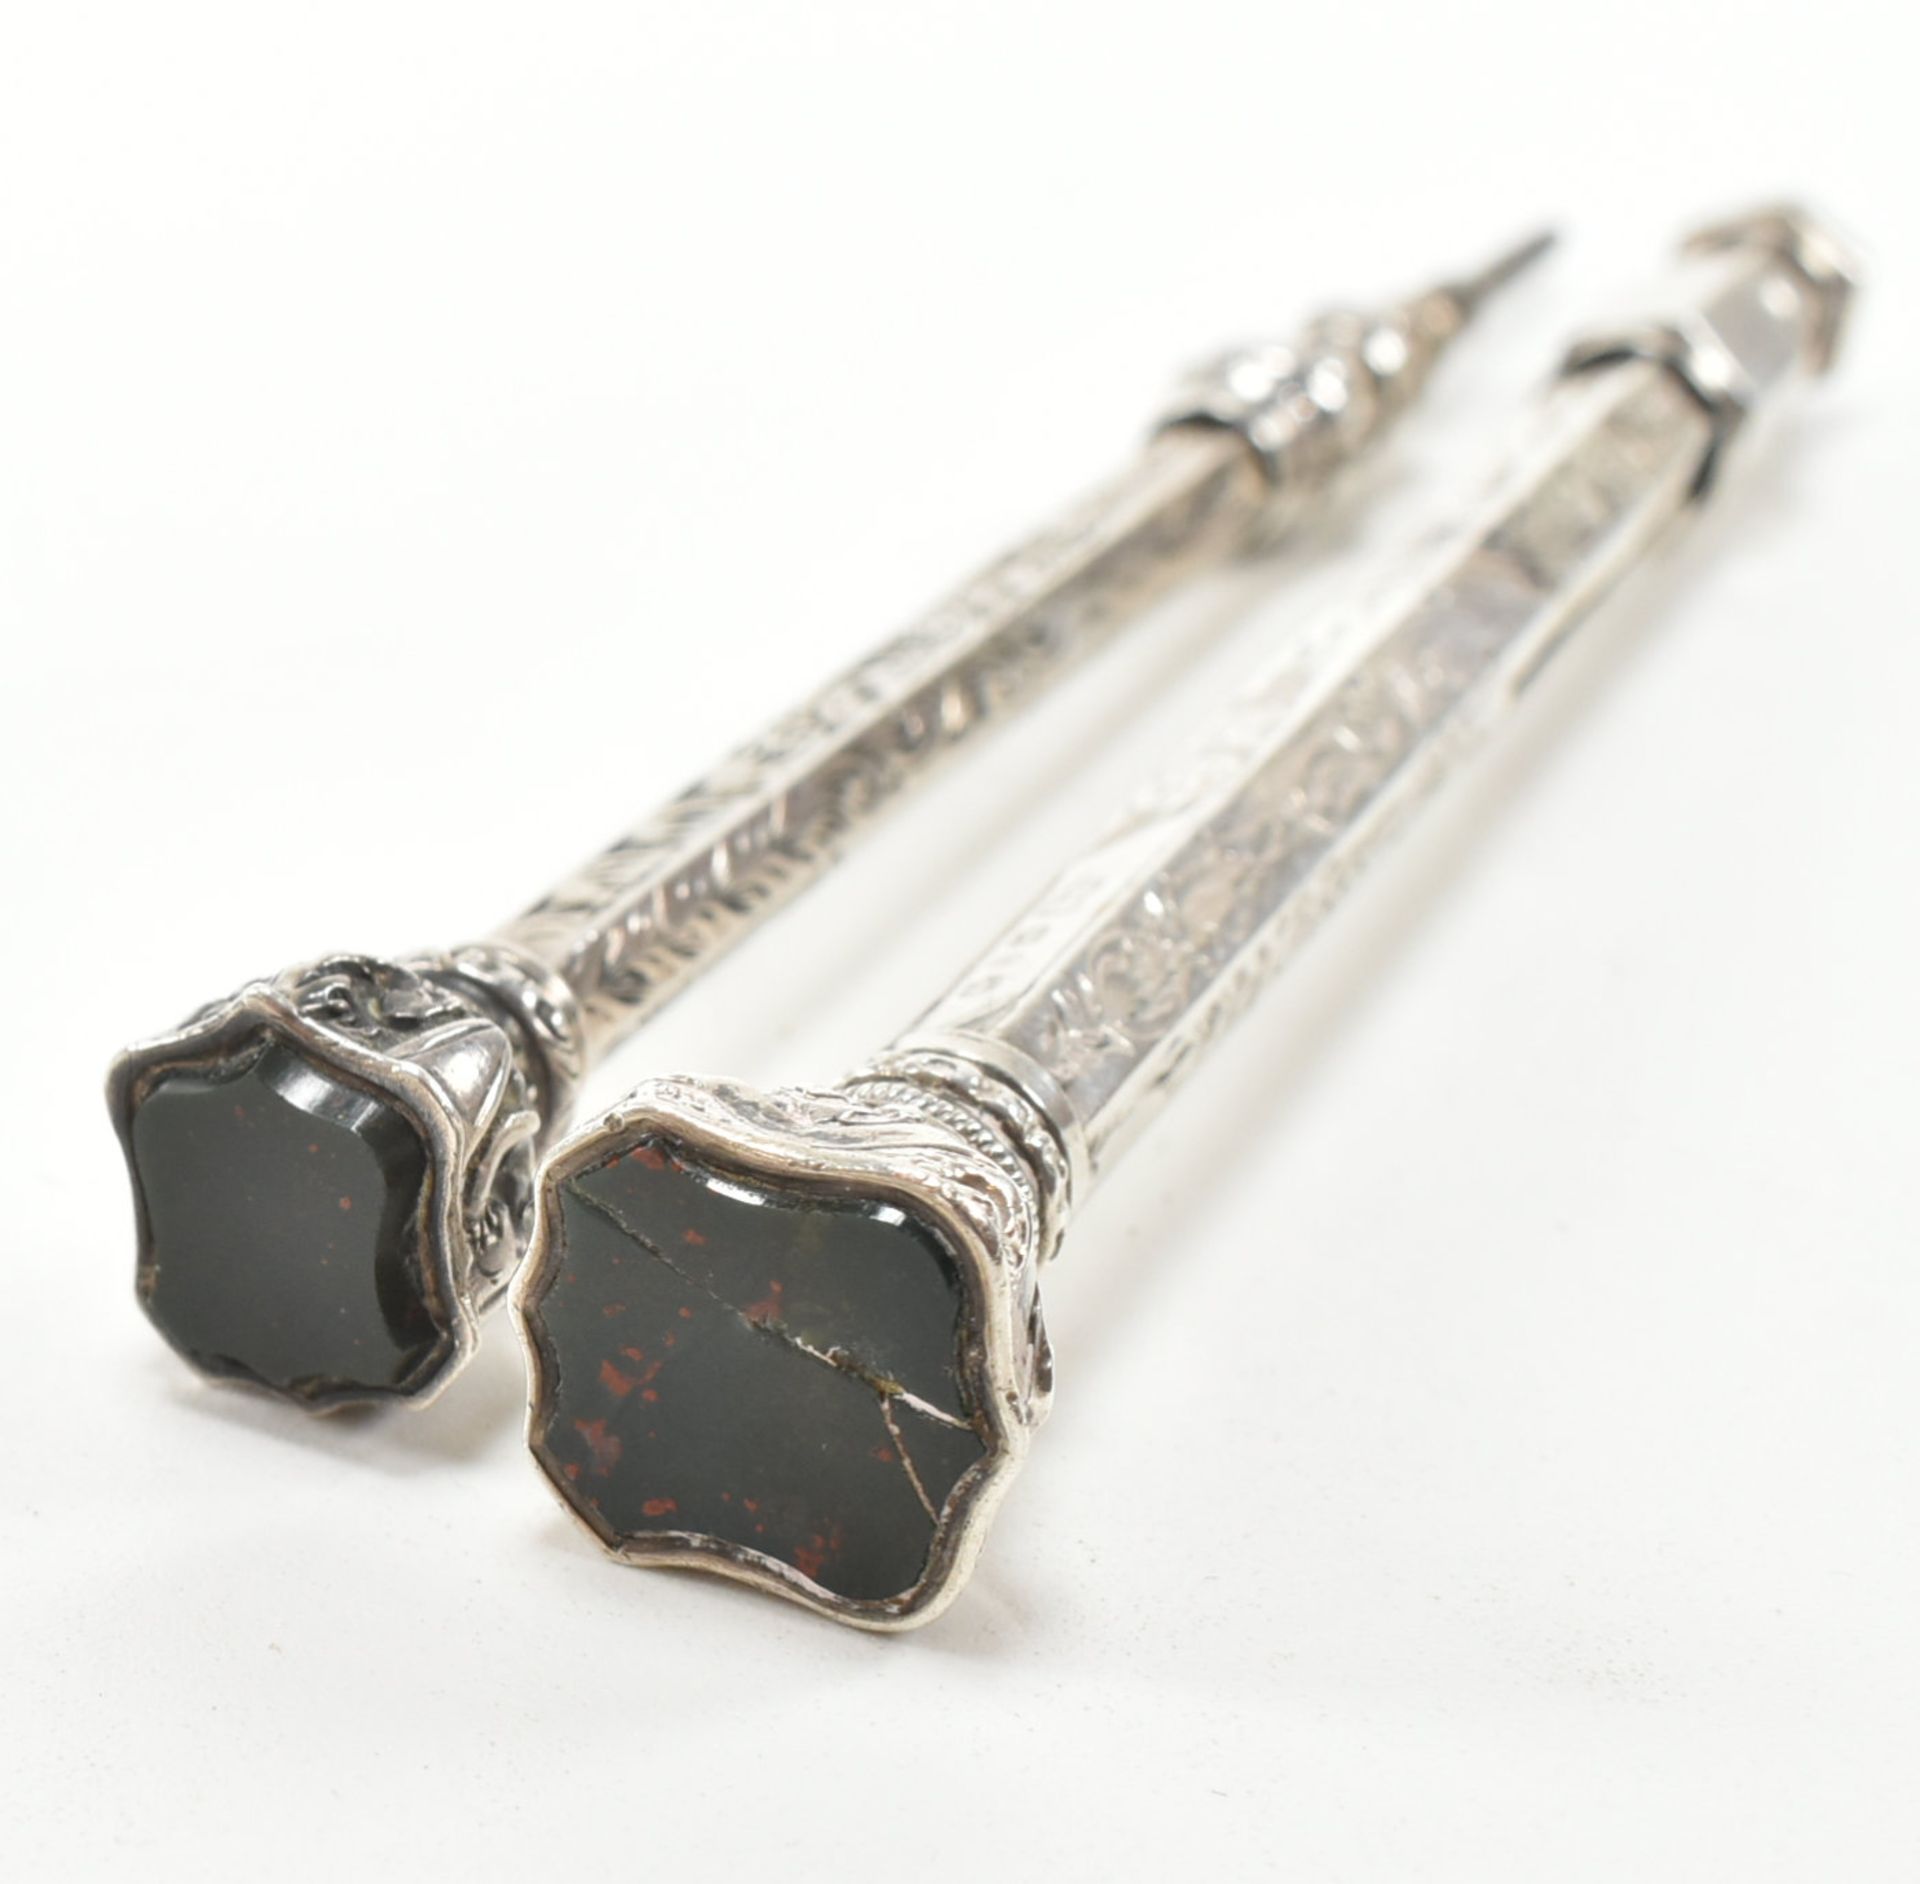 TWO SILVER PROPELLING PENCILS WITH BLOODSTONE SEALS - Image 5 of 10